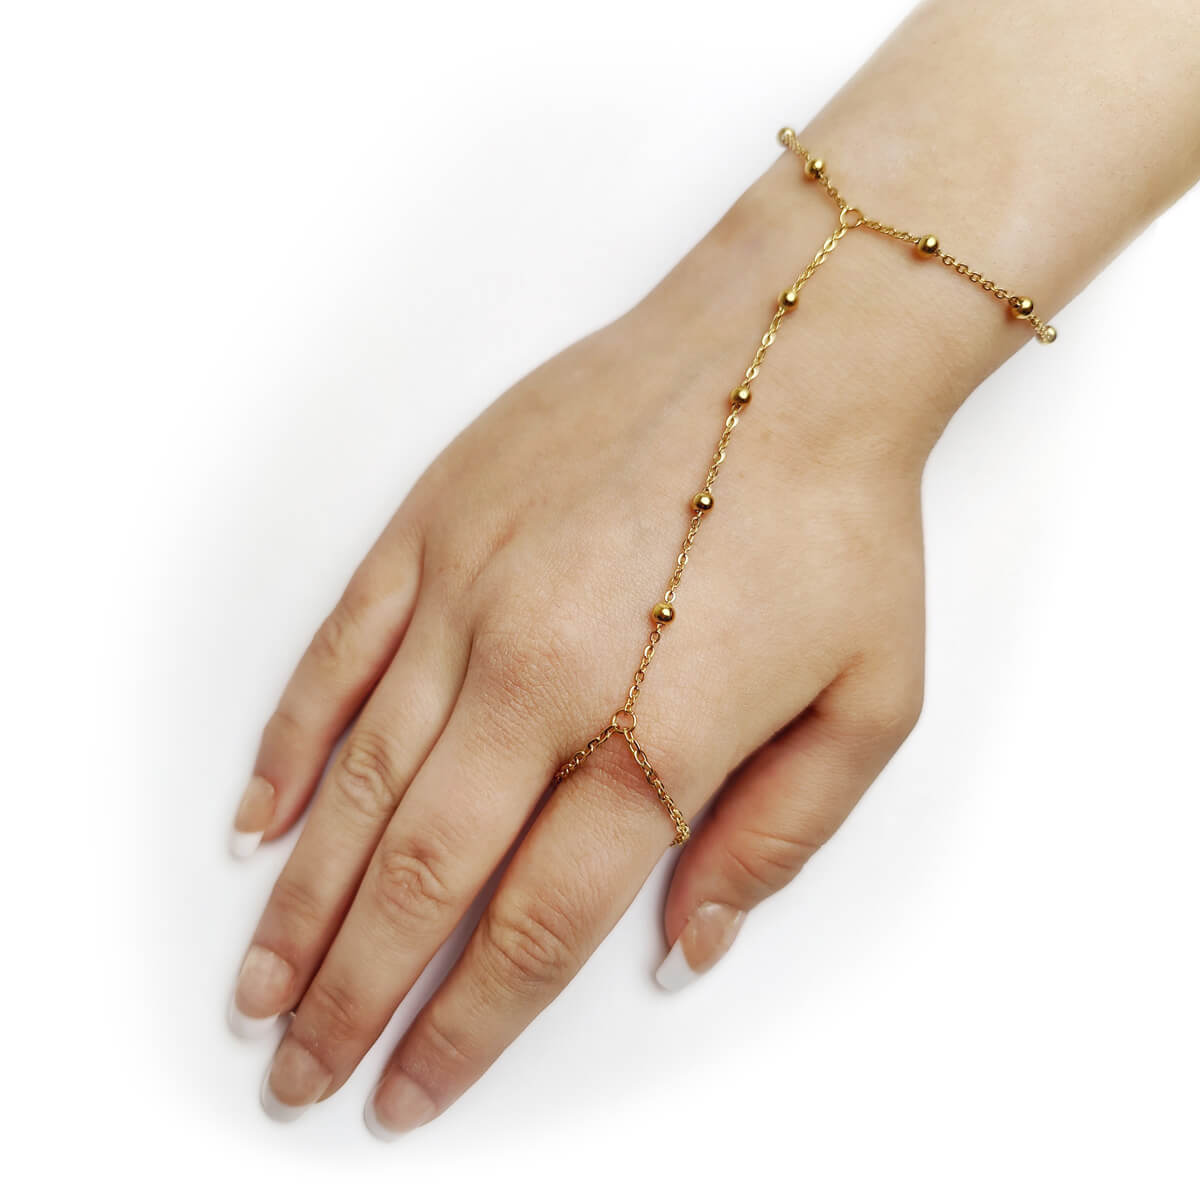 Pearl Hand Jewelry Ring Chain (18K Golden Steel)